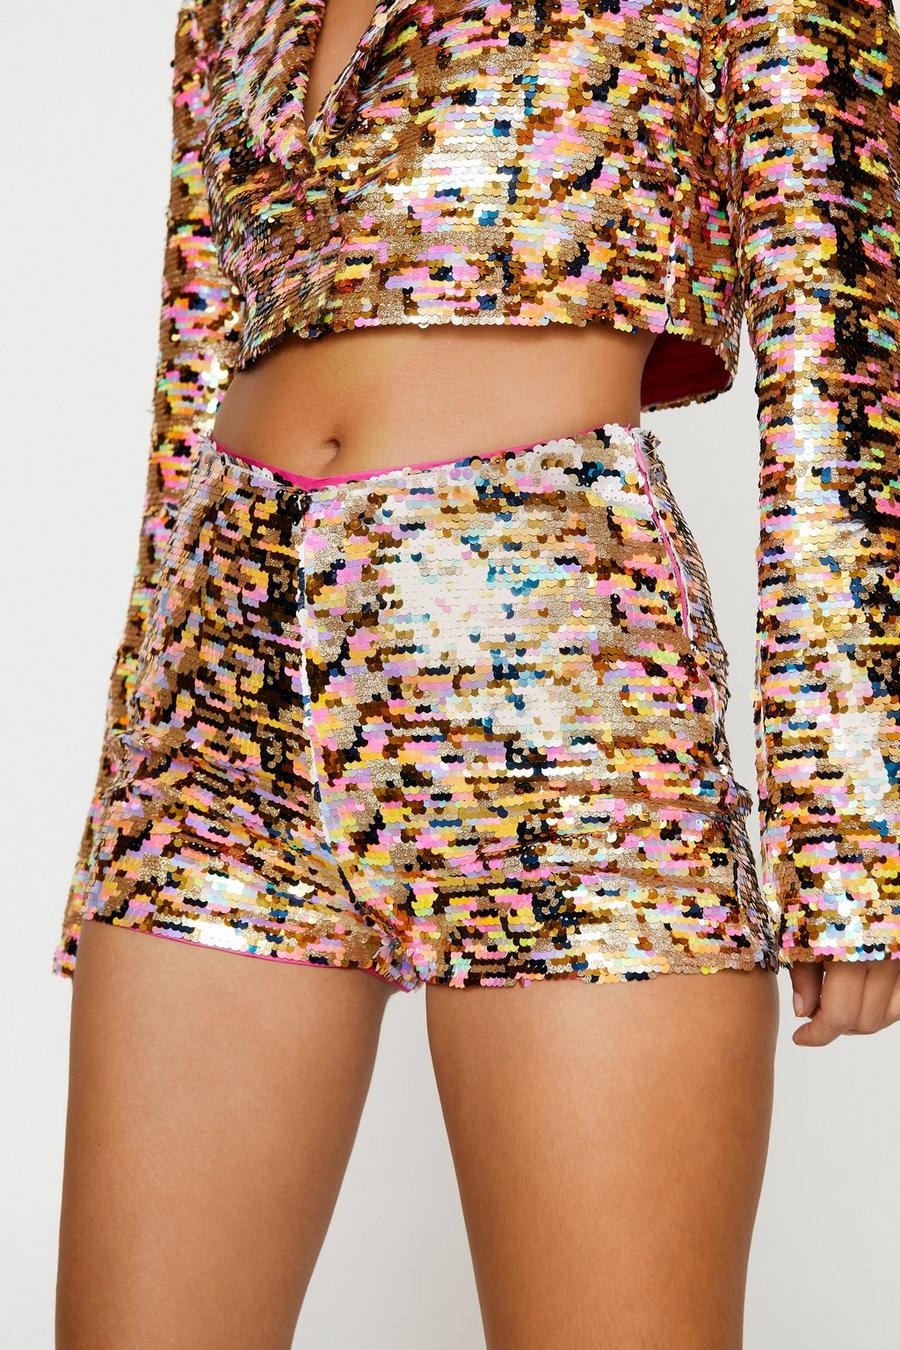 Gold Glitter Sequin Booty Shorts